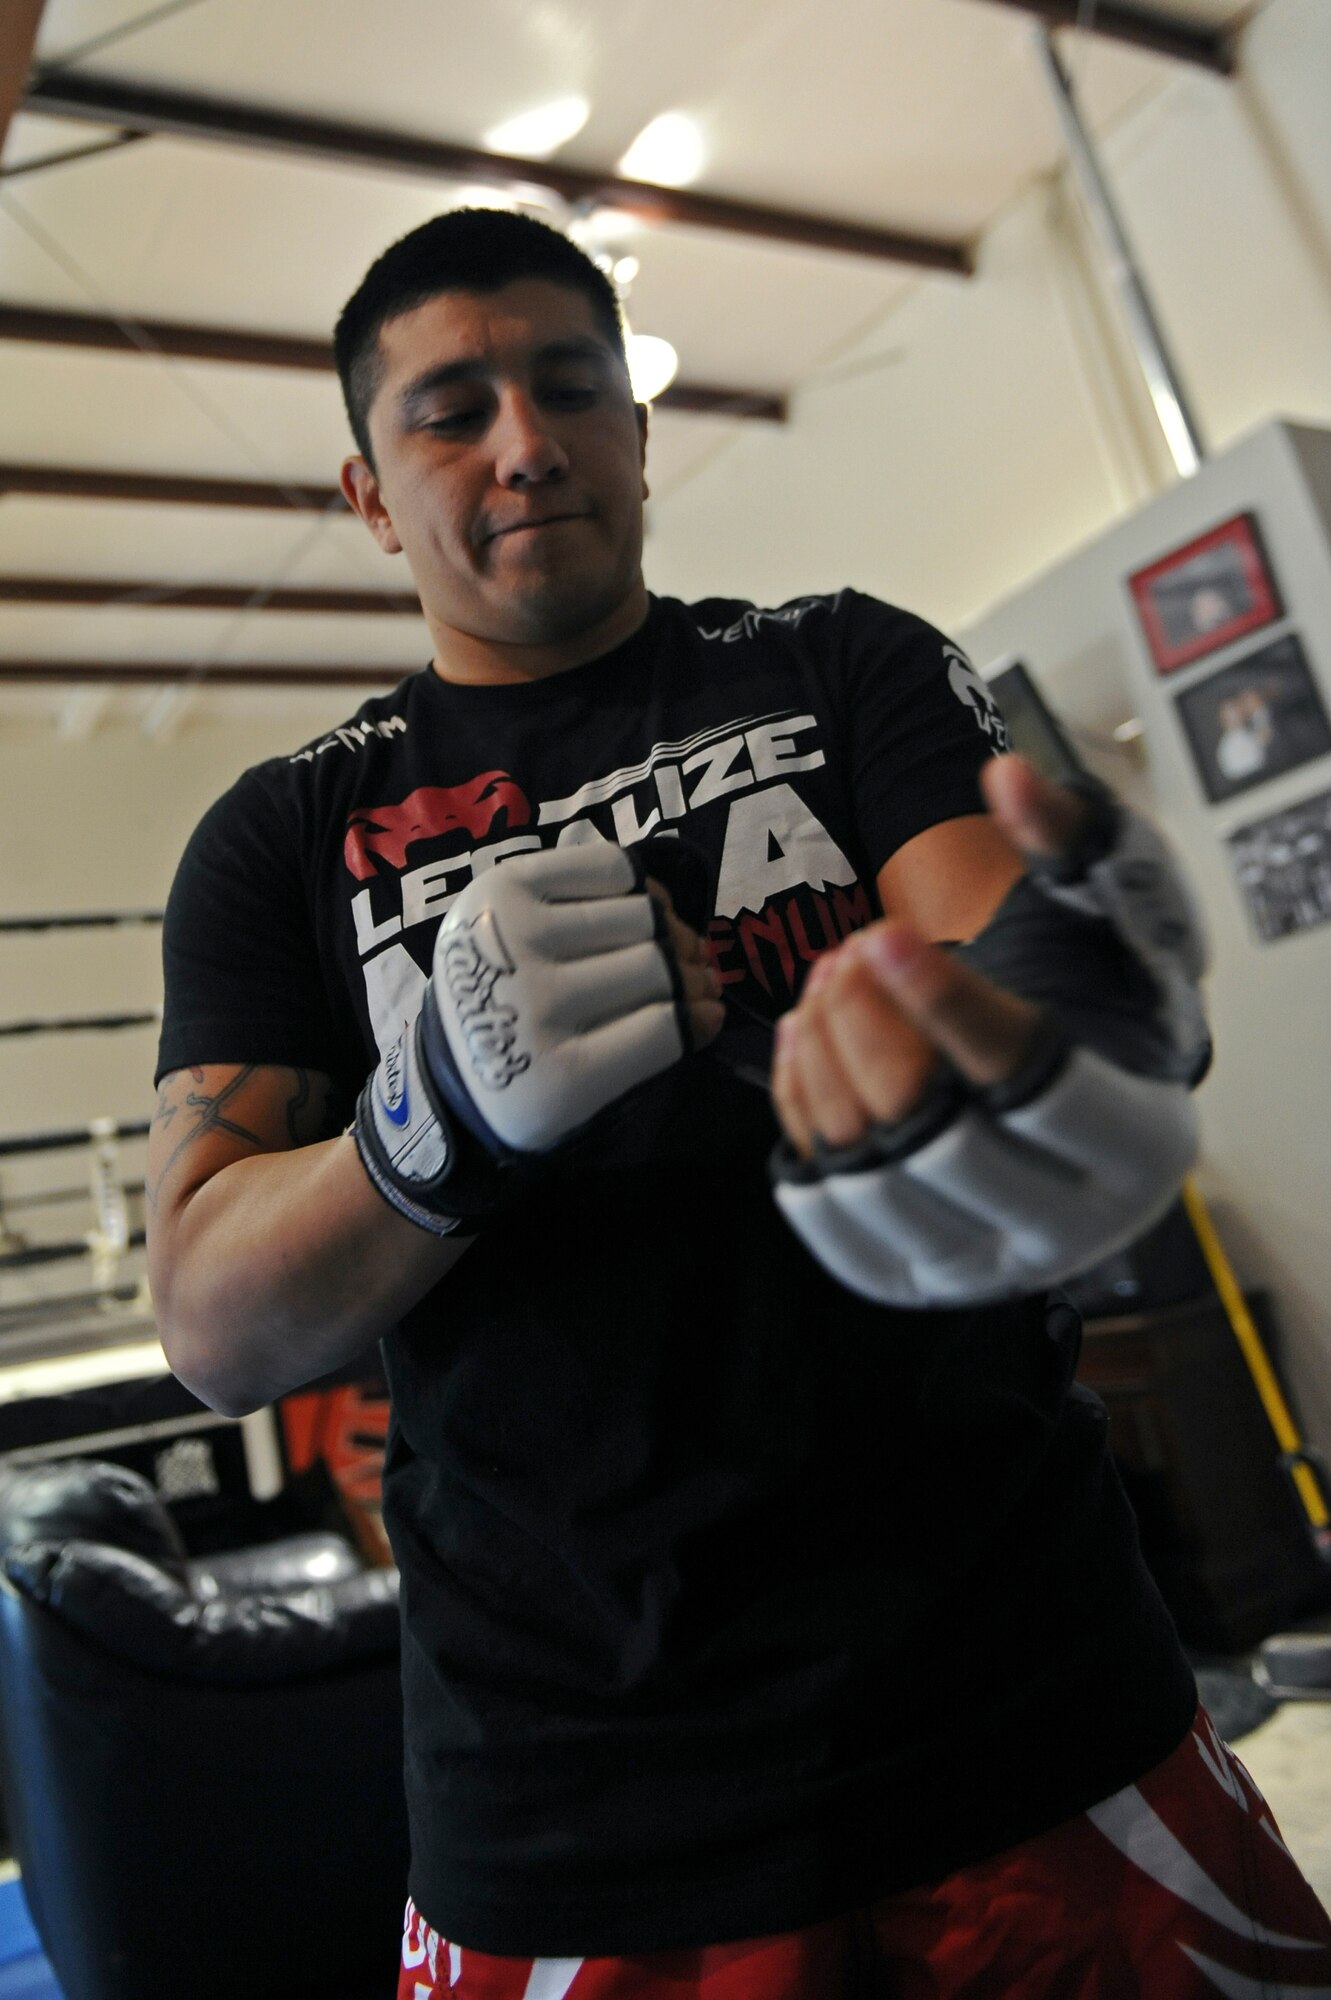 Staff Sgt. Jeremy Caudillo, 2nd Force Support Squadron fitness center supervisor, puts on a pair of mixed martial arts fighting gloves at a local MMA gym in Bossier City, La., Dec. 12. Caudillo is currently training for his first professional MMA fight in March. Caudillo competed in local amateur MMA fights for the past two years. His current record is six wins and three losses. (U.S. Air Force photo/Senior Airman Micaiah Anthony)
